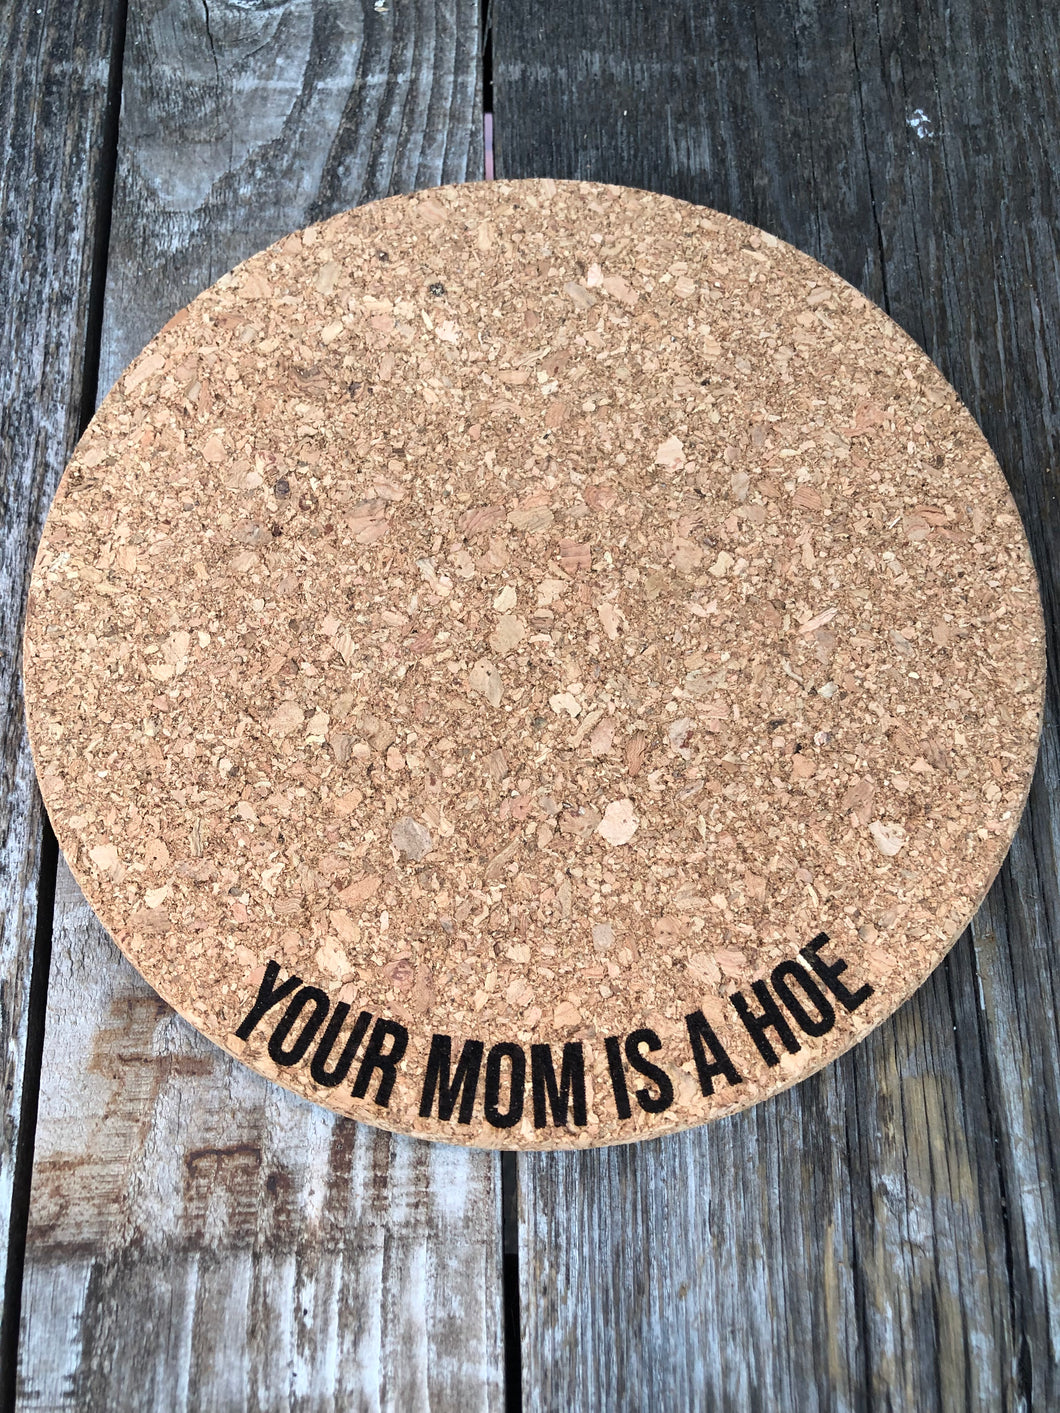 Your Mom is a Hoe Cork Plant Mat - Engraved Cork Round - Cork Bottom - No Plastic or Rubber - All Natural Material